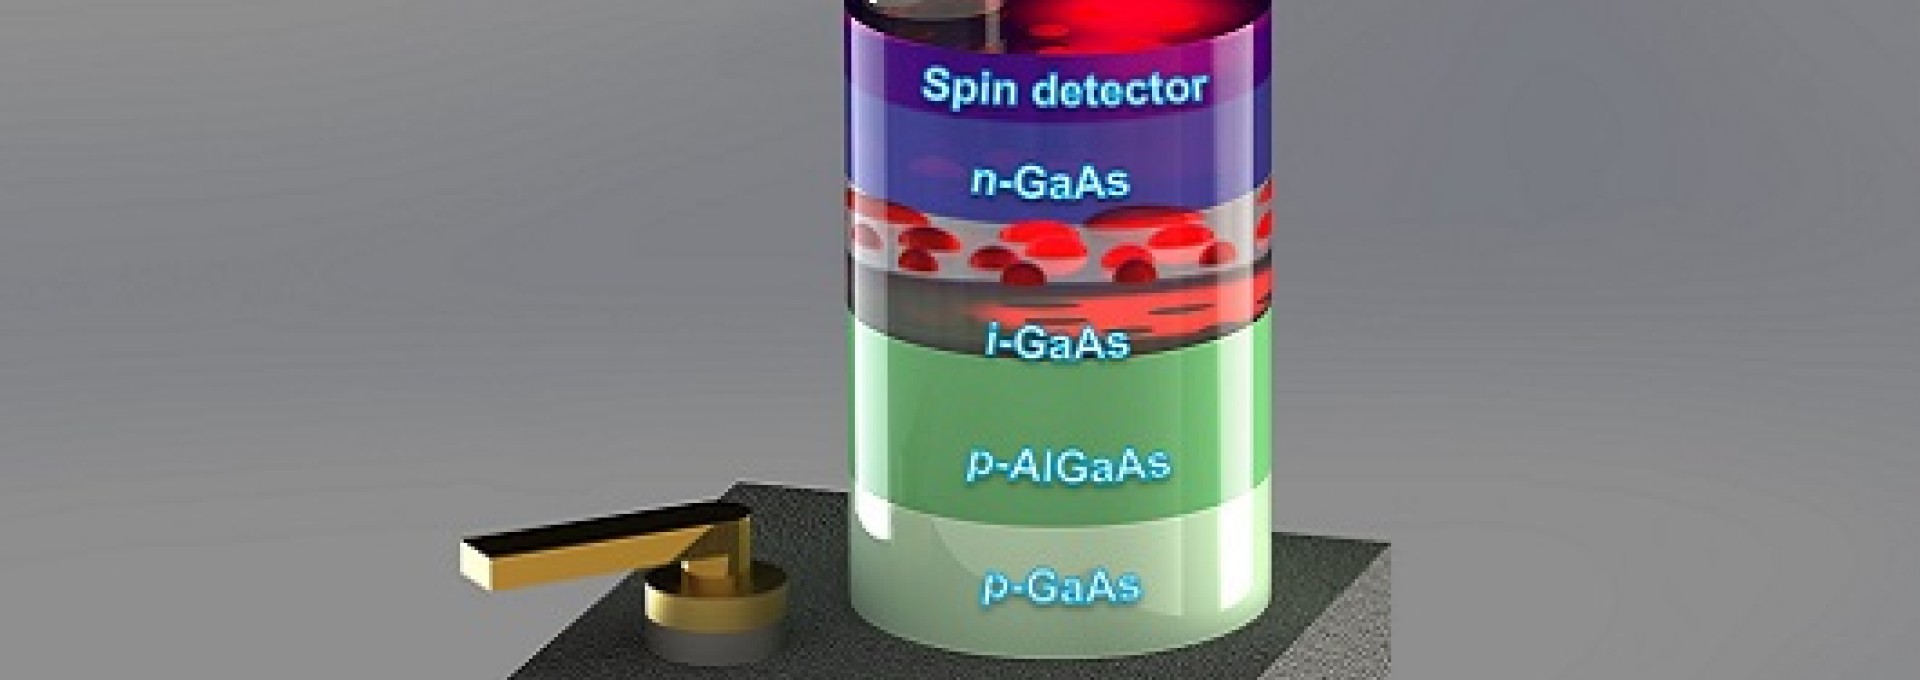 A new step forward for spin photodiode physics and technology